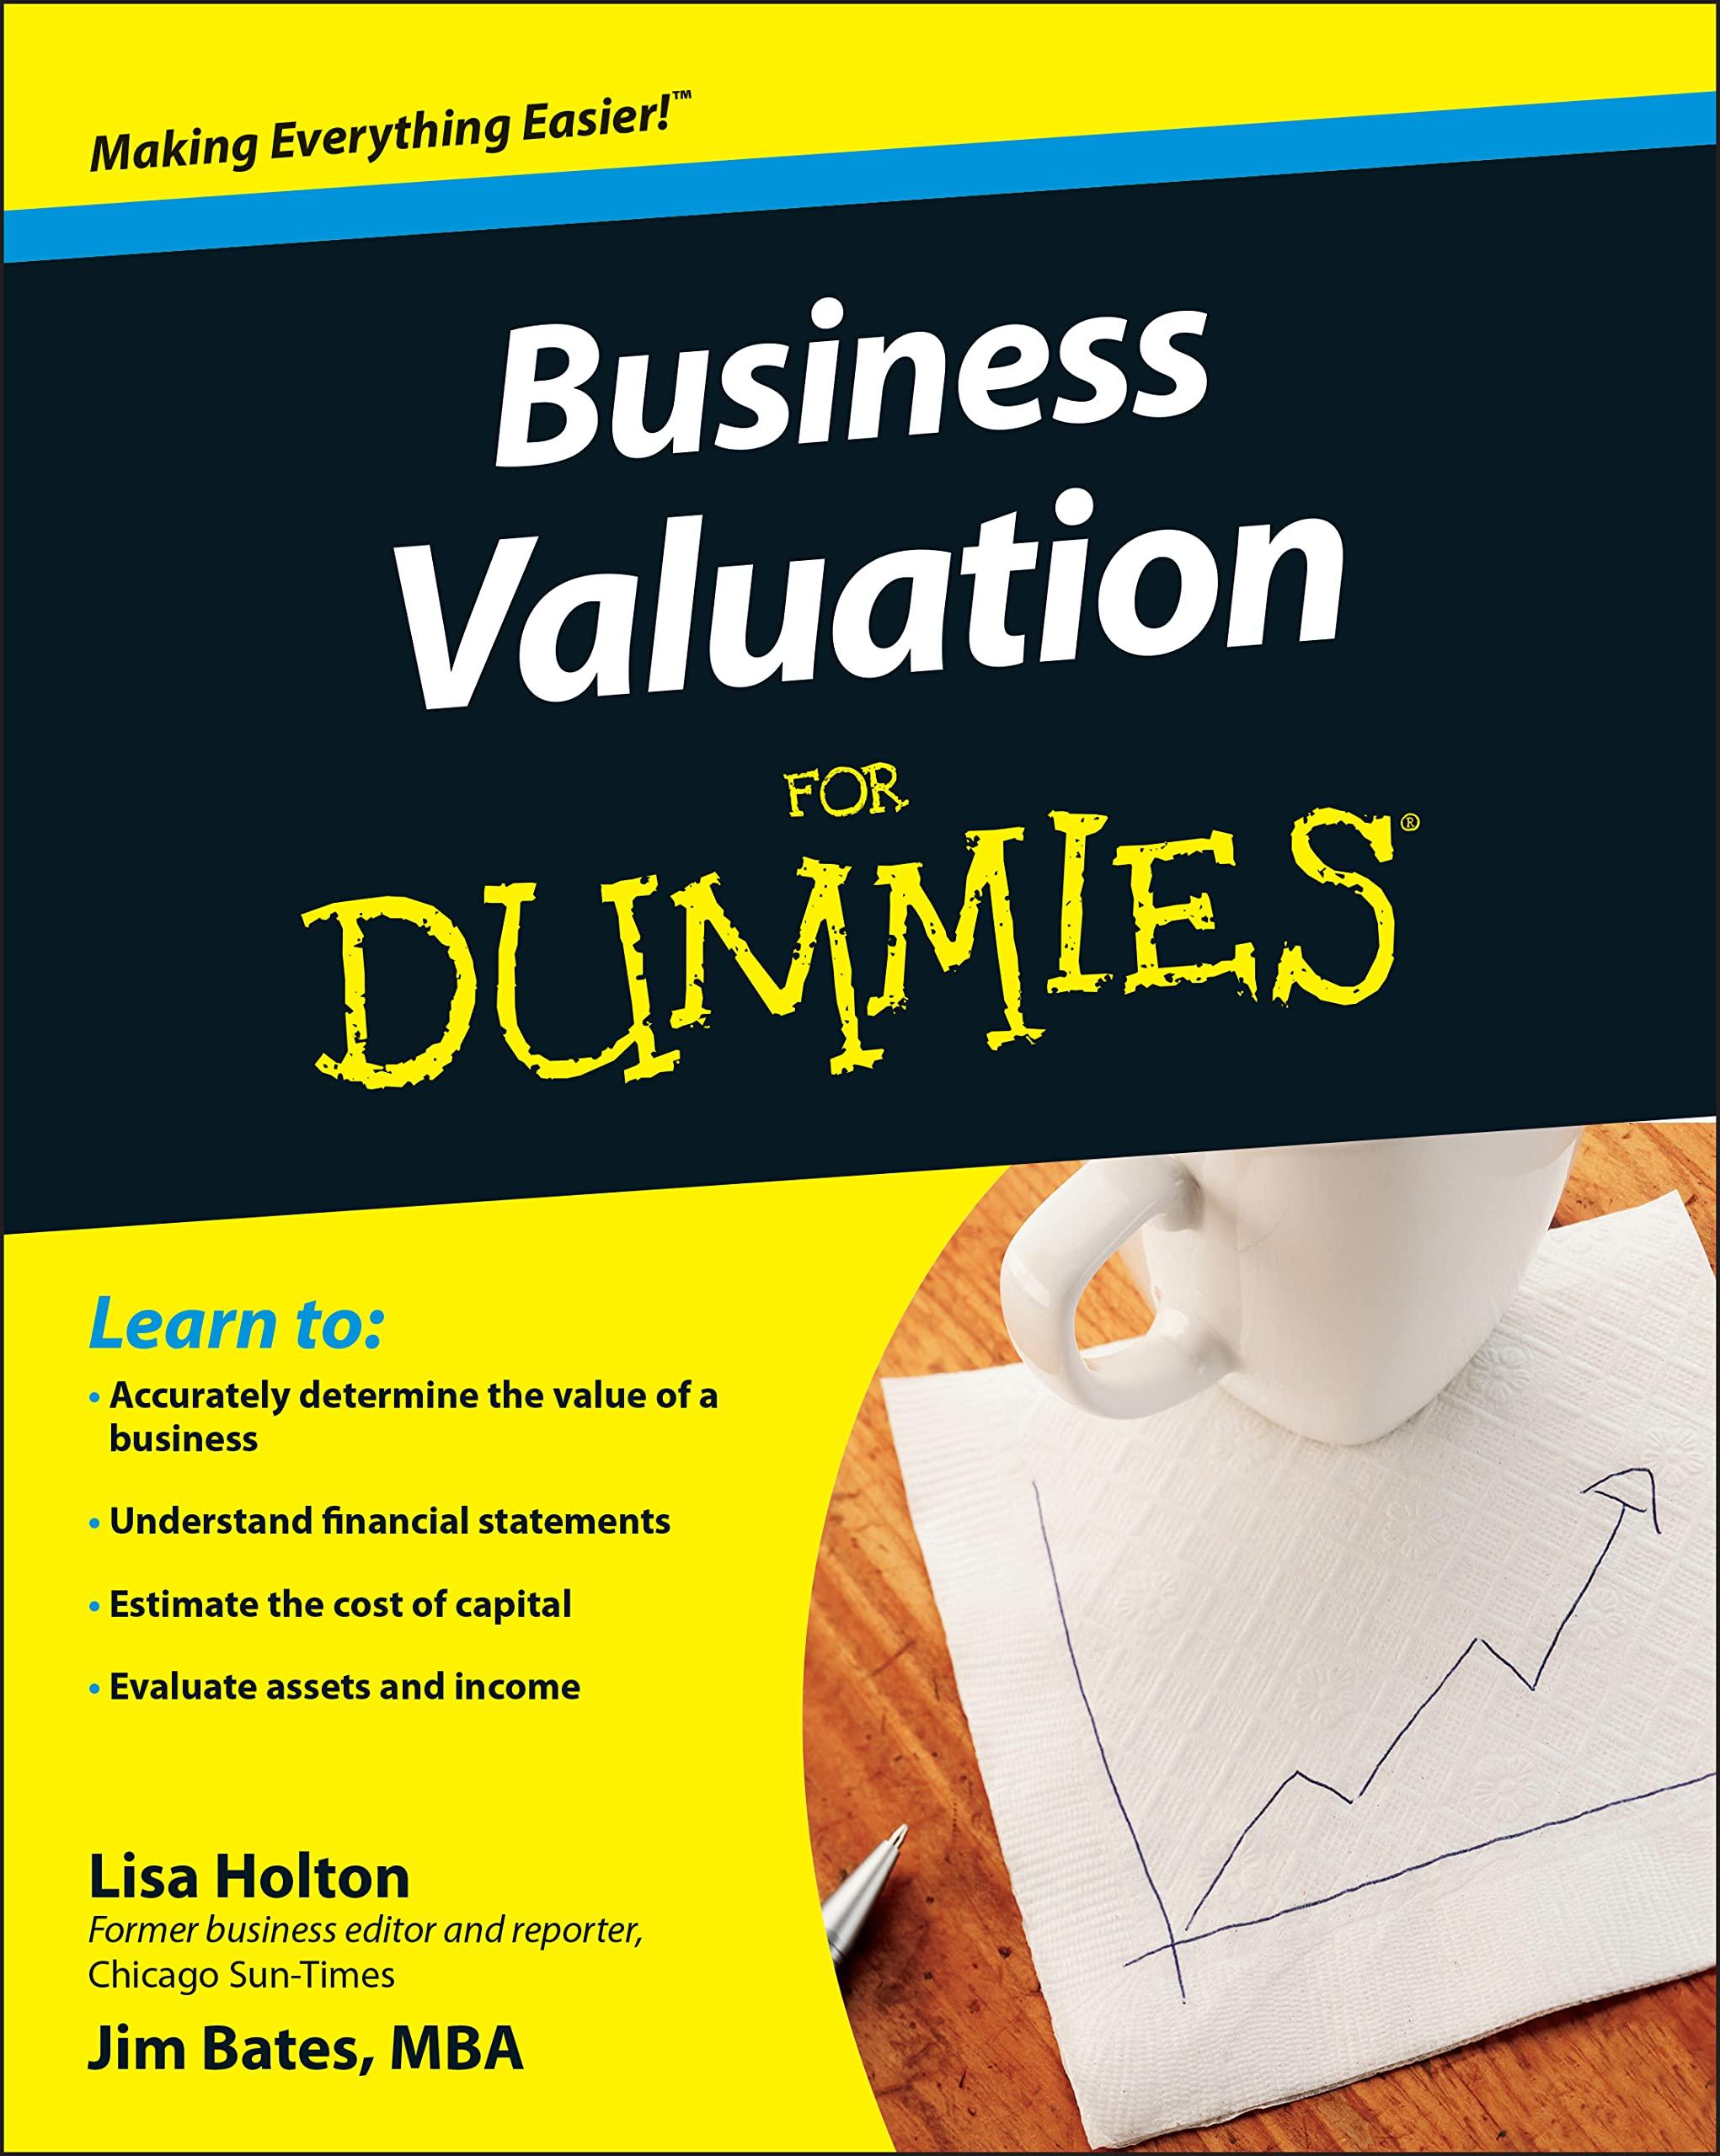 business valuation for dummies 1st edition jim bates, lisa holton 0470344016, 978-0470344019